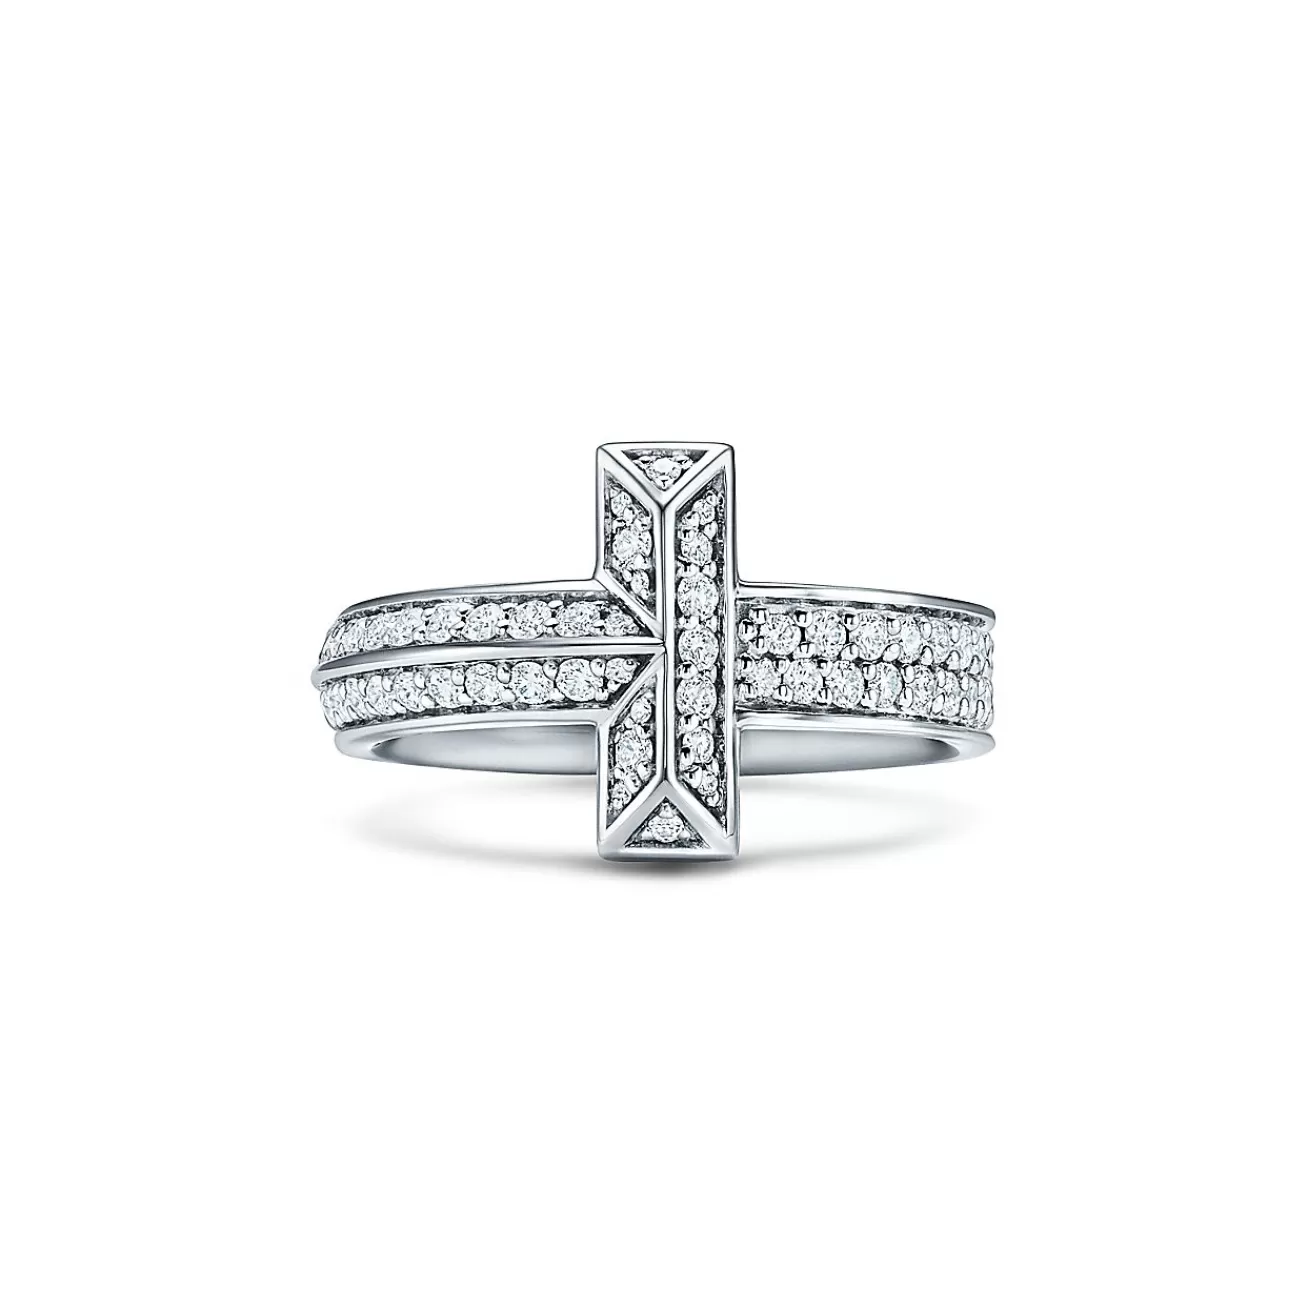 Tiffany & Co. Tiffany T T1 Ring in White Gold with Diamonds, 4.5 mm Wide | ^ Rings | Men's Jewelry